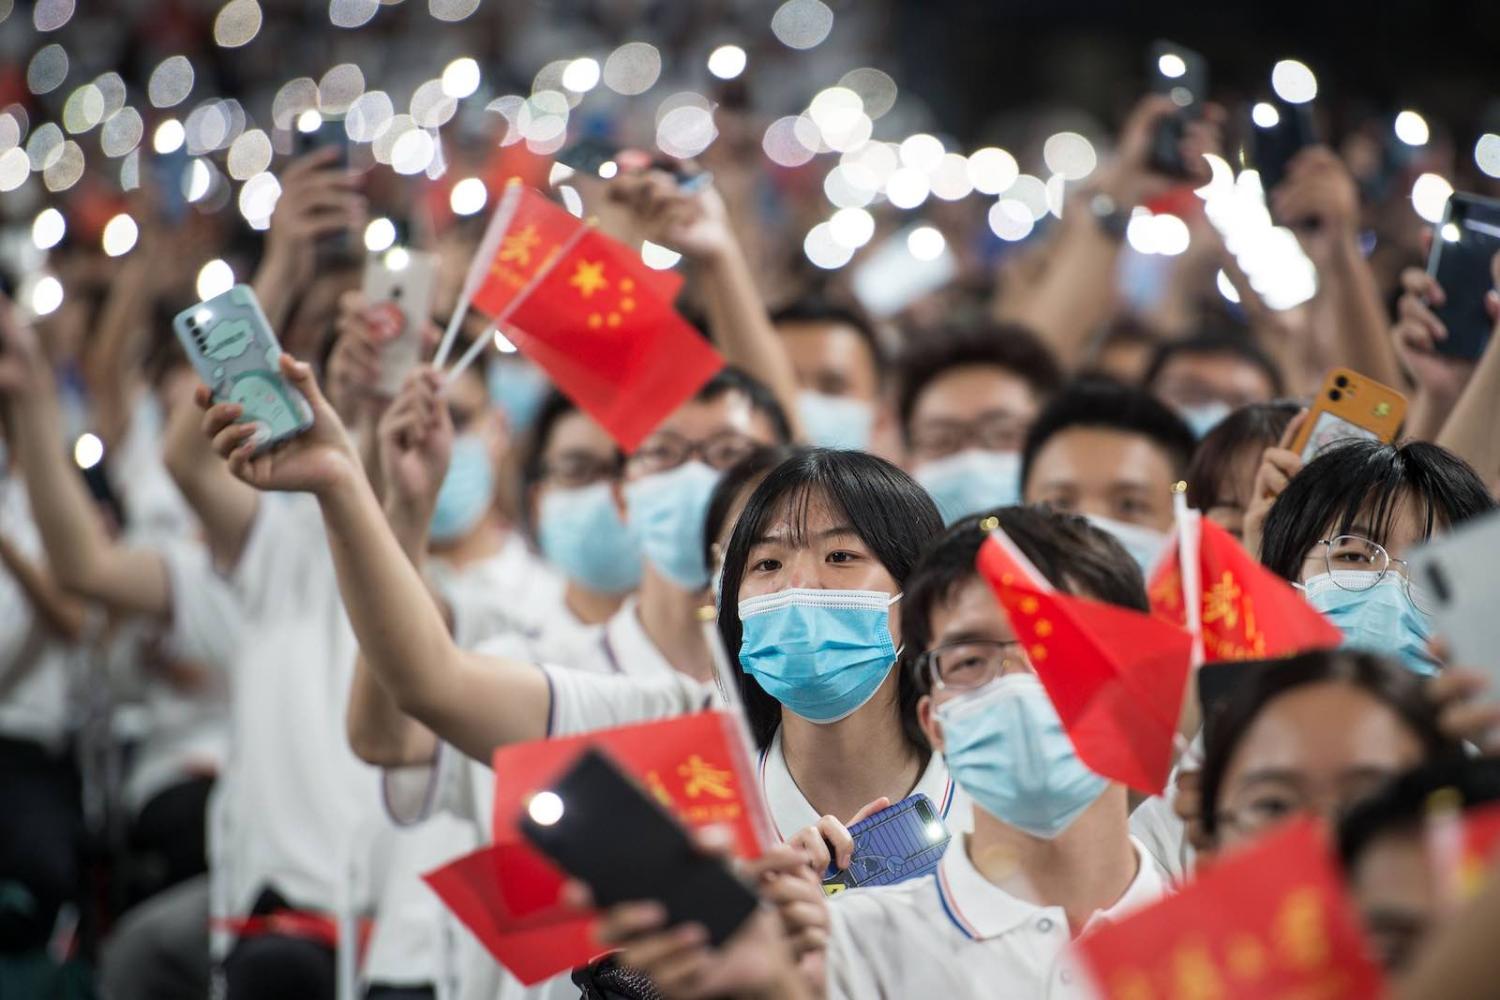 First-year students on 26 September a commencement ceremony at Wuhan University in Wuhan, China (STR/AFP via Getty Images)